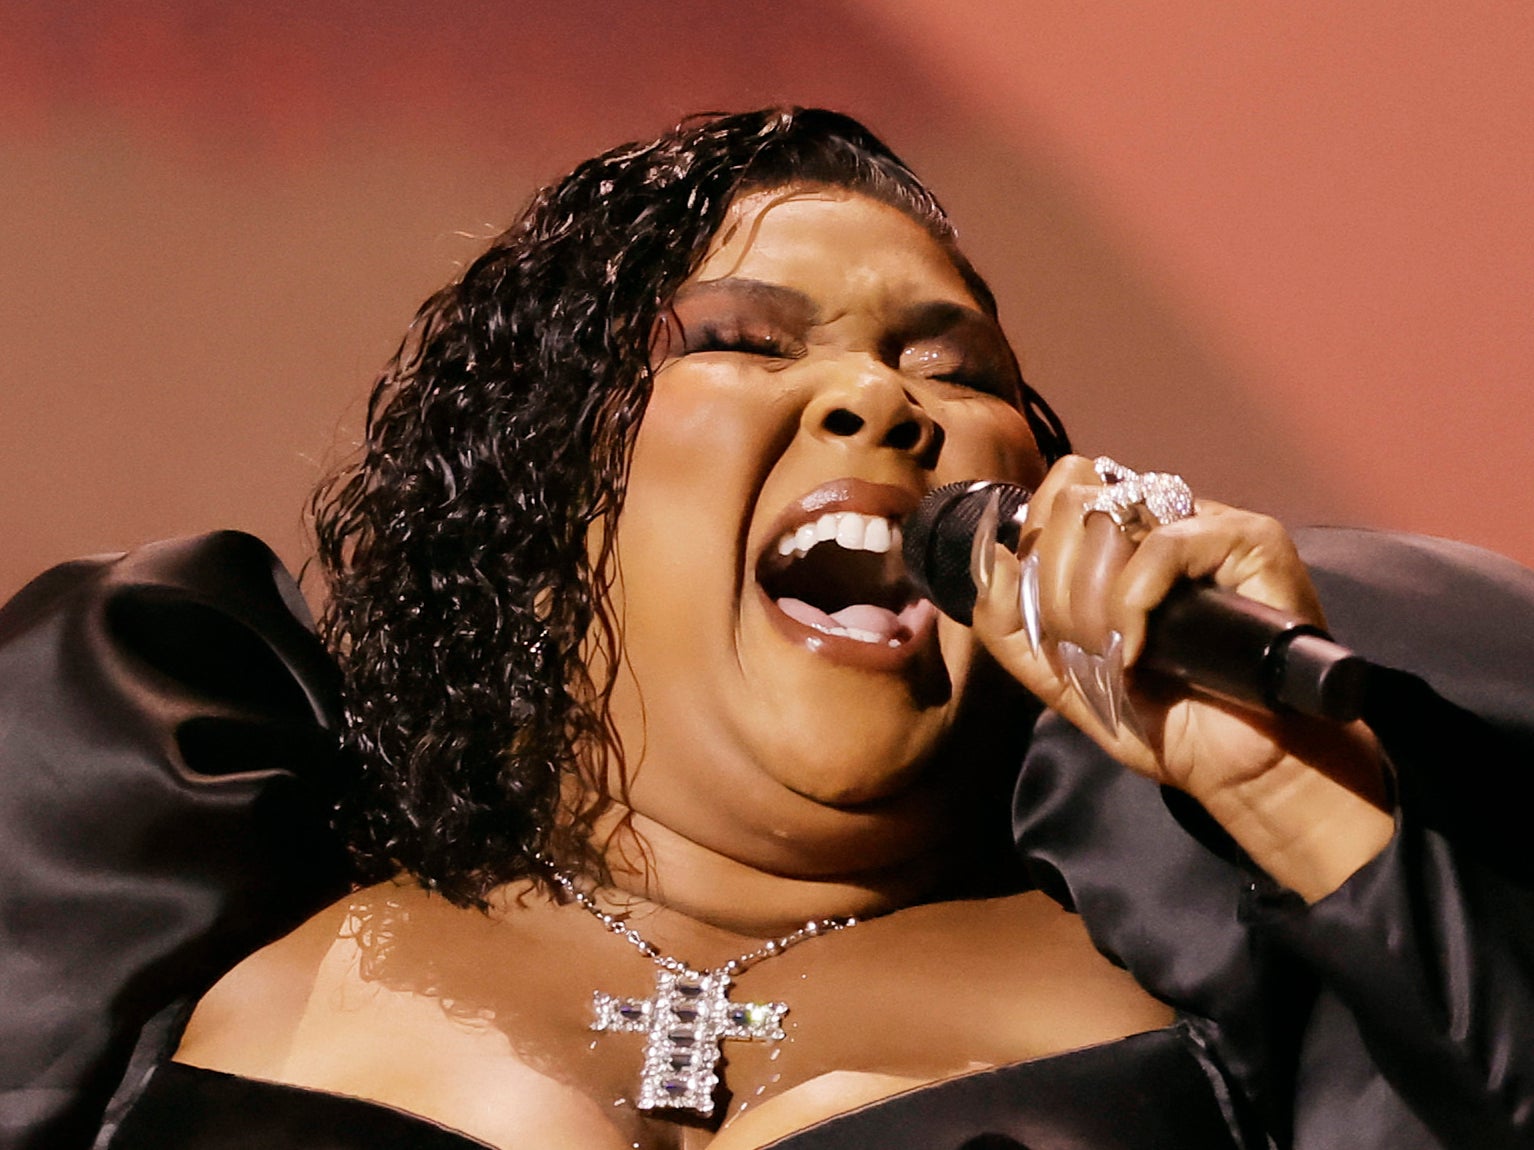 Lizzo has denied the allegations against her